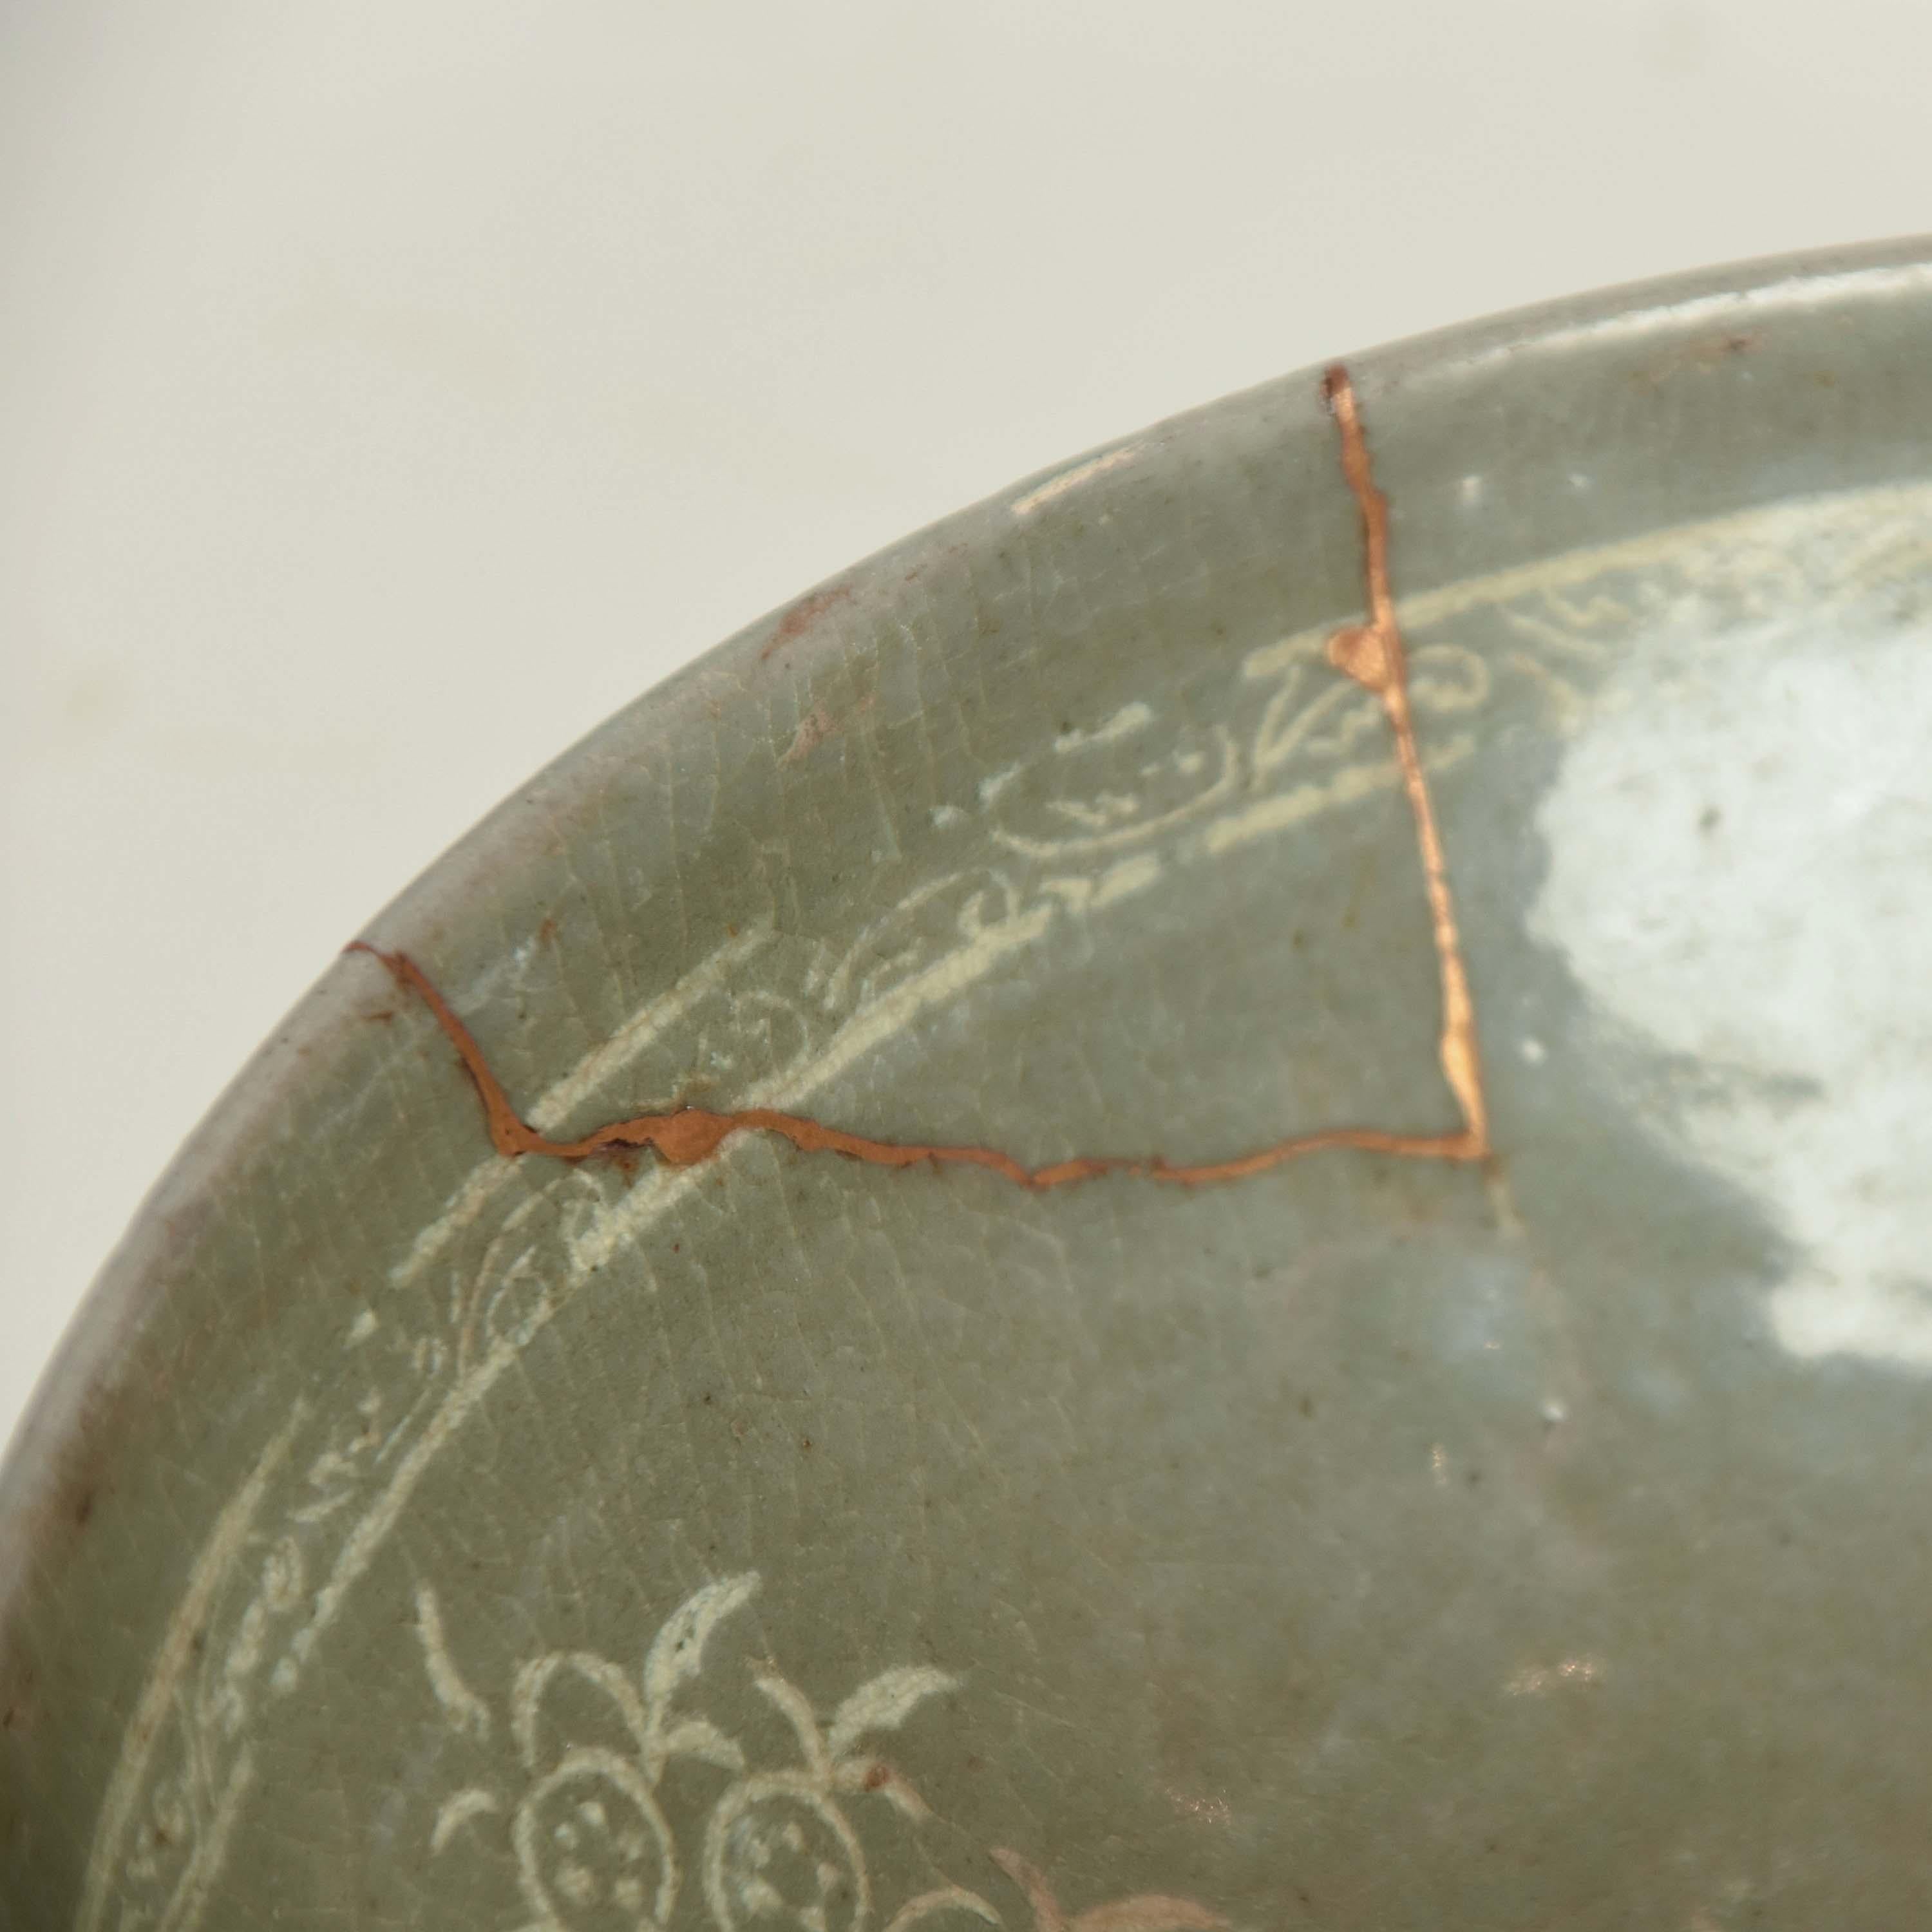 An antique Korean celadon glazed stoneware tea bowl from 15th century. It has been lovingly repaired with gold, using the kintsugi method, sometime during its long life, adding an extra layer of beauty and value. Kintsugi literally means 